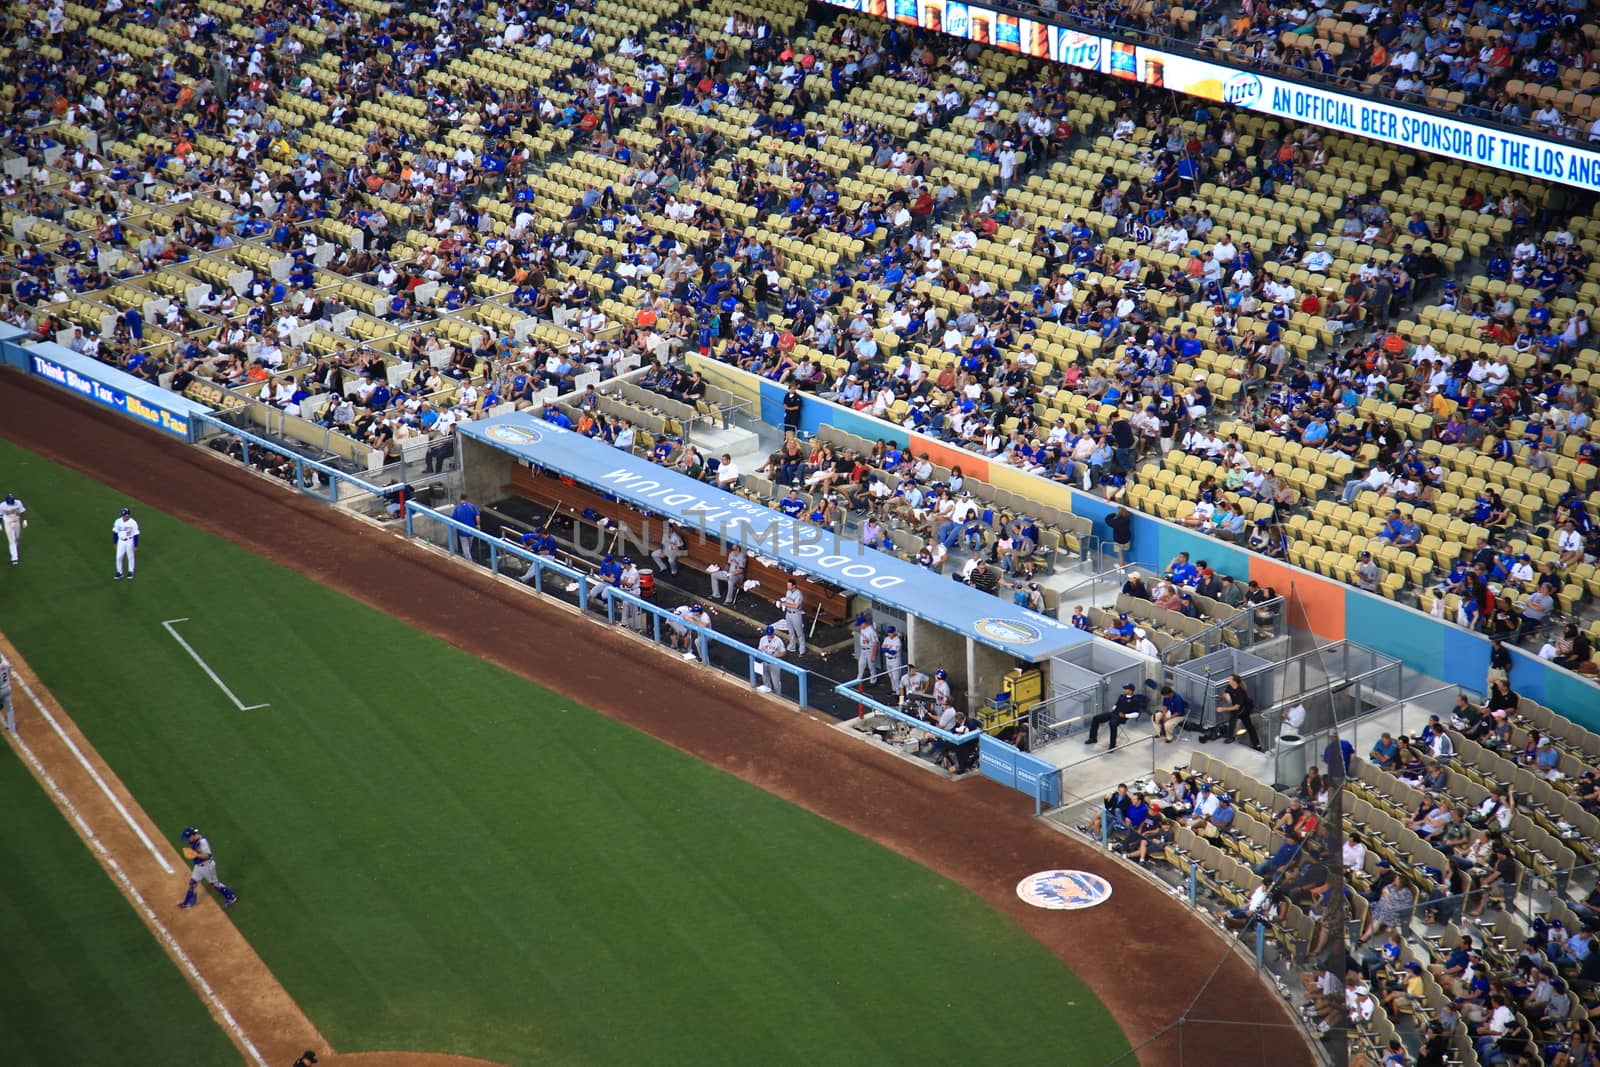 The New York Mets watching from the dugout at a baseball game at Dodger Stadium, home of the Los Angeles Dodgers